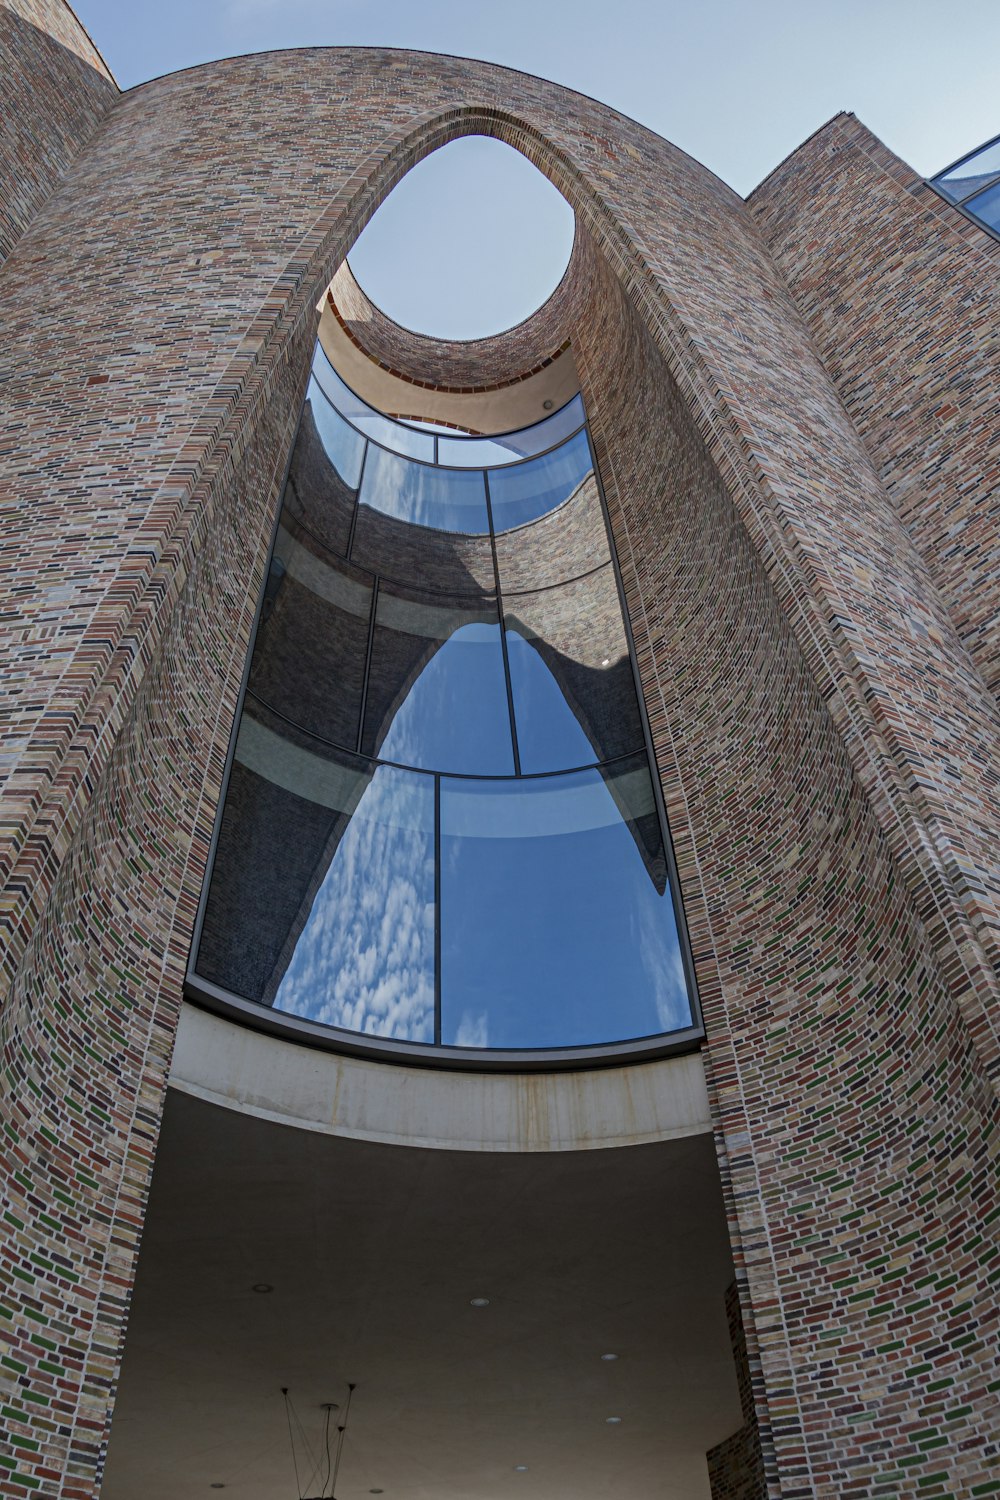 a very tall brick building with a circular window